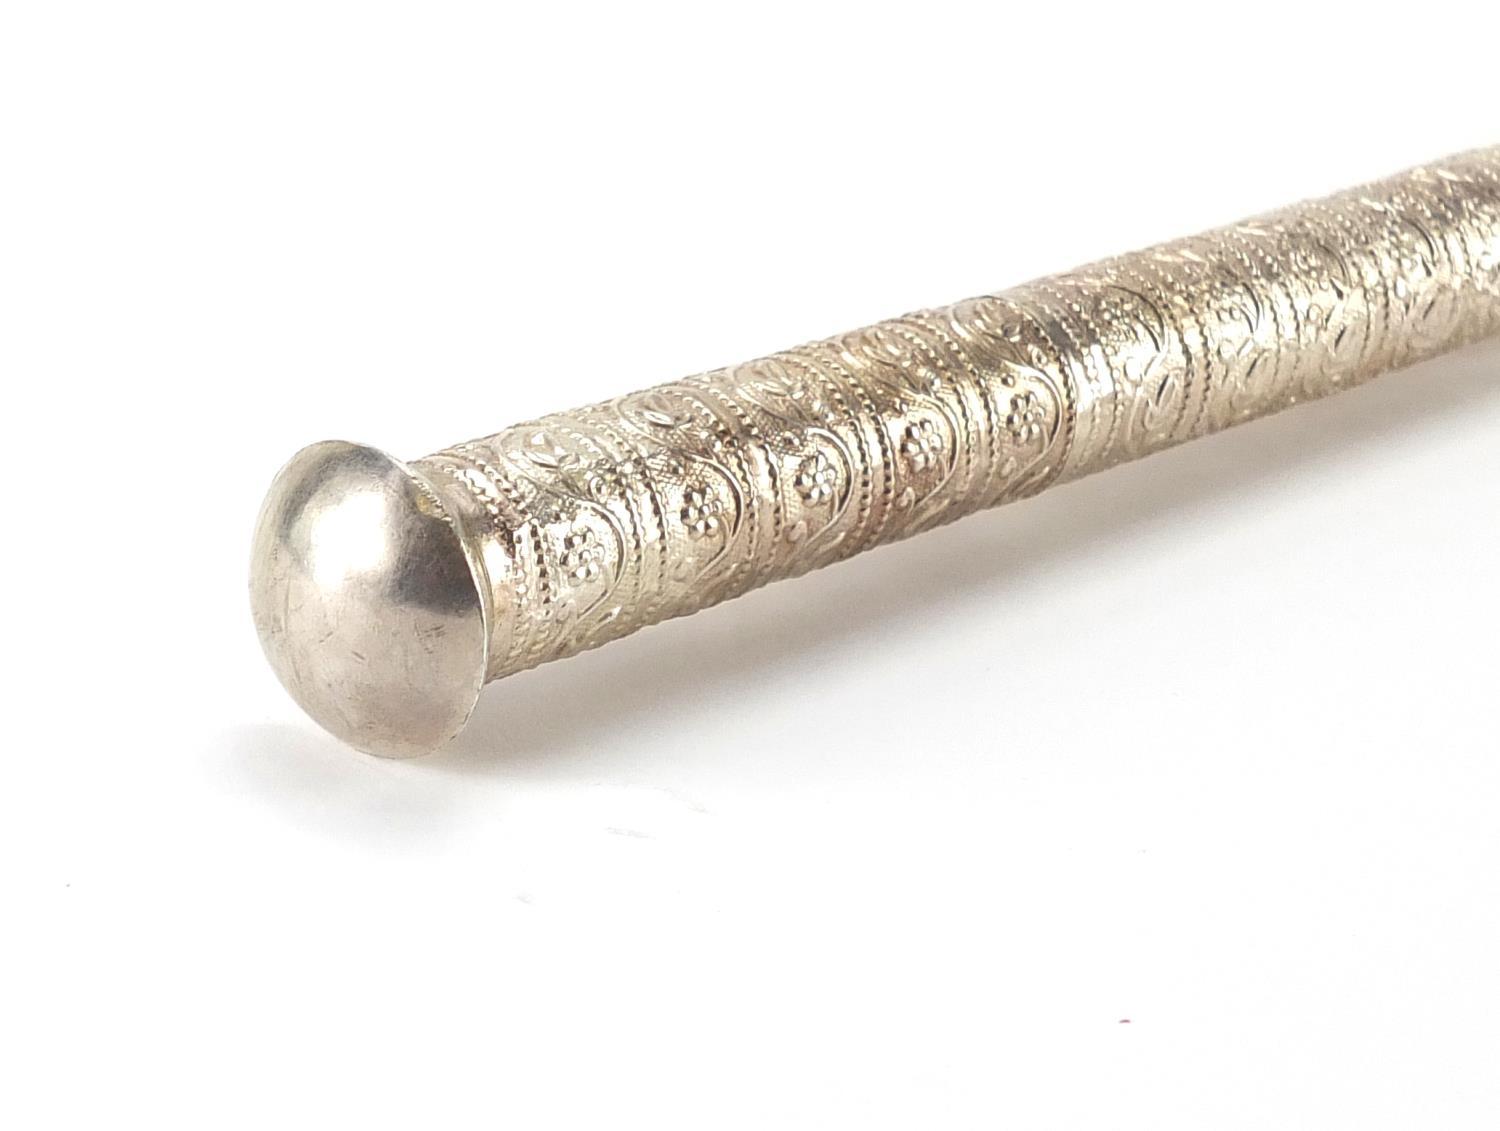 Omani silver walking cane embossed with flowers and foliage, 91cm in length : For further - Image 6 of 6